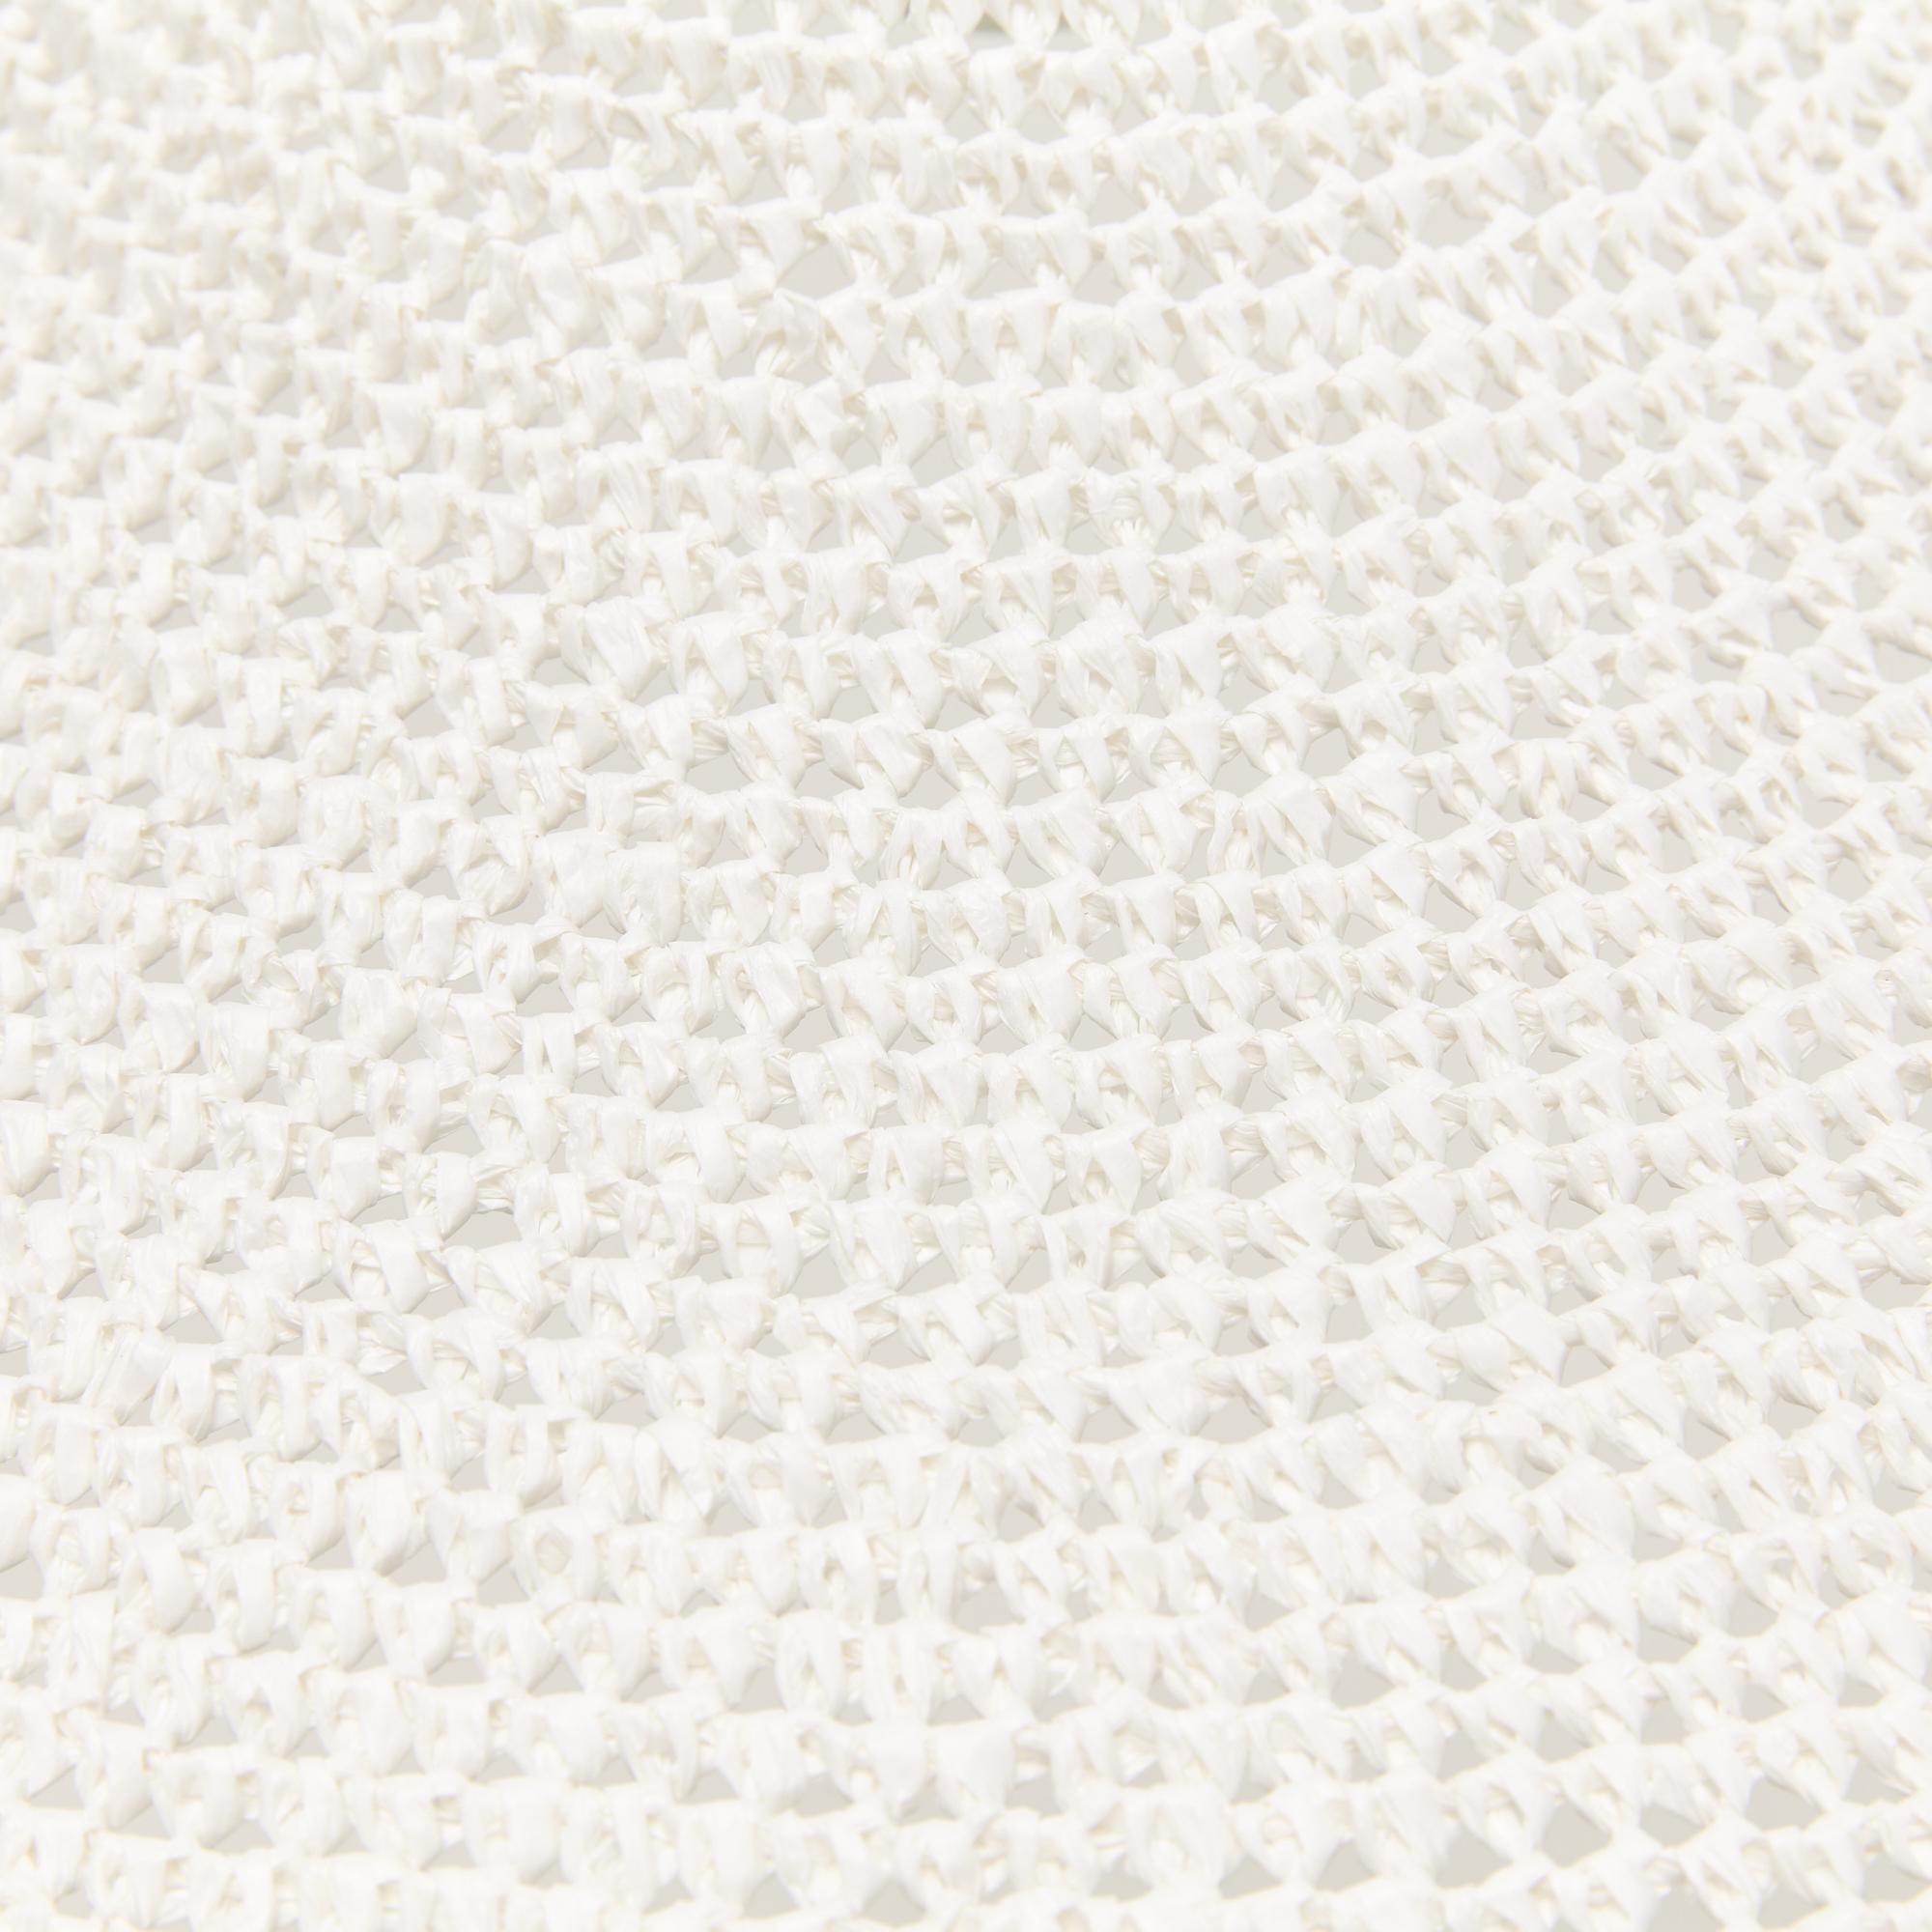 British SOLITAIRE 01 Pendant Light Ø60cm/23.6in, Hand Crocheted in Egyptian Cotton For Sale